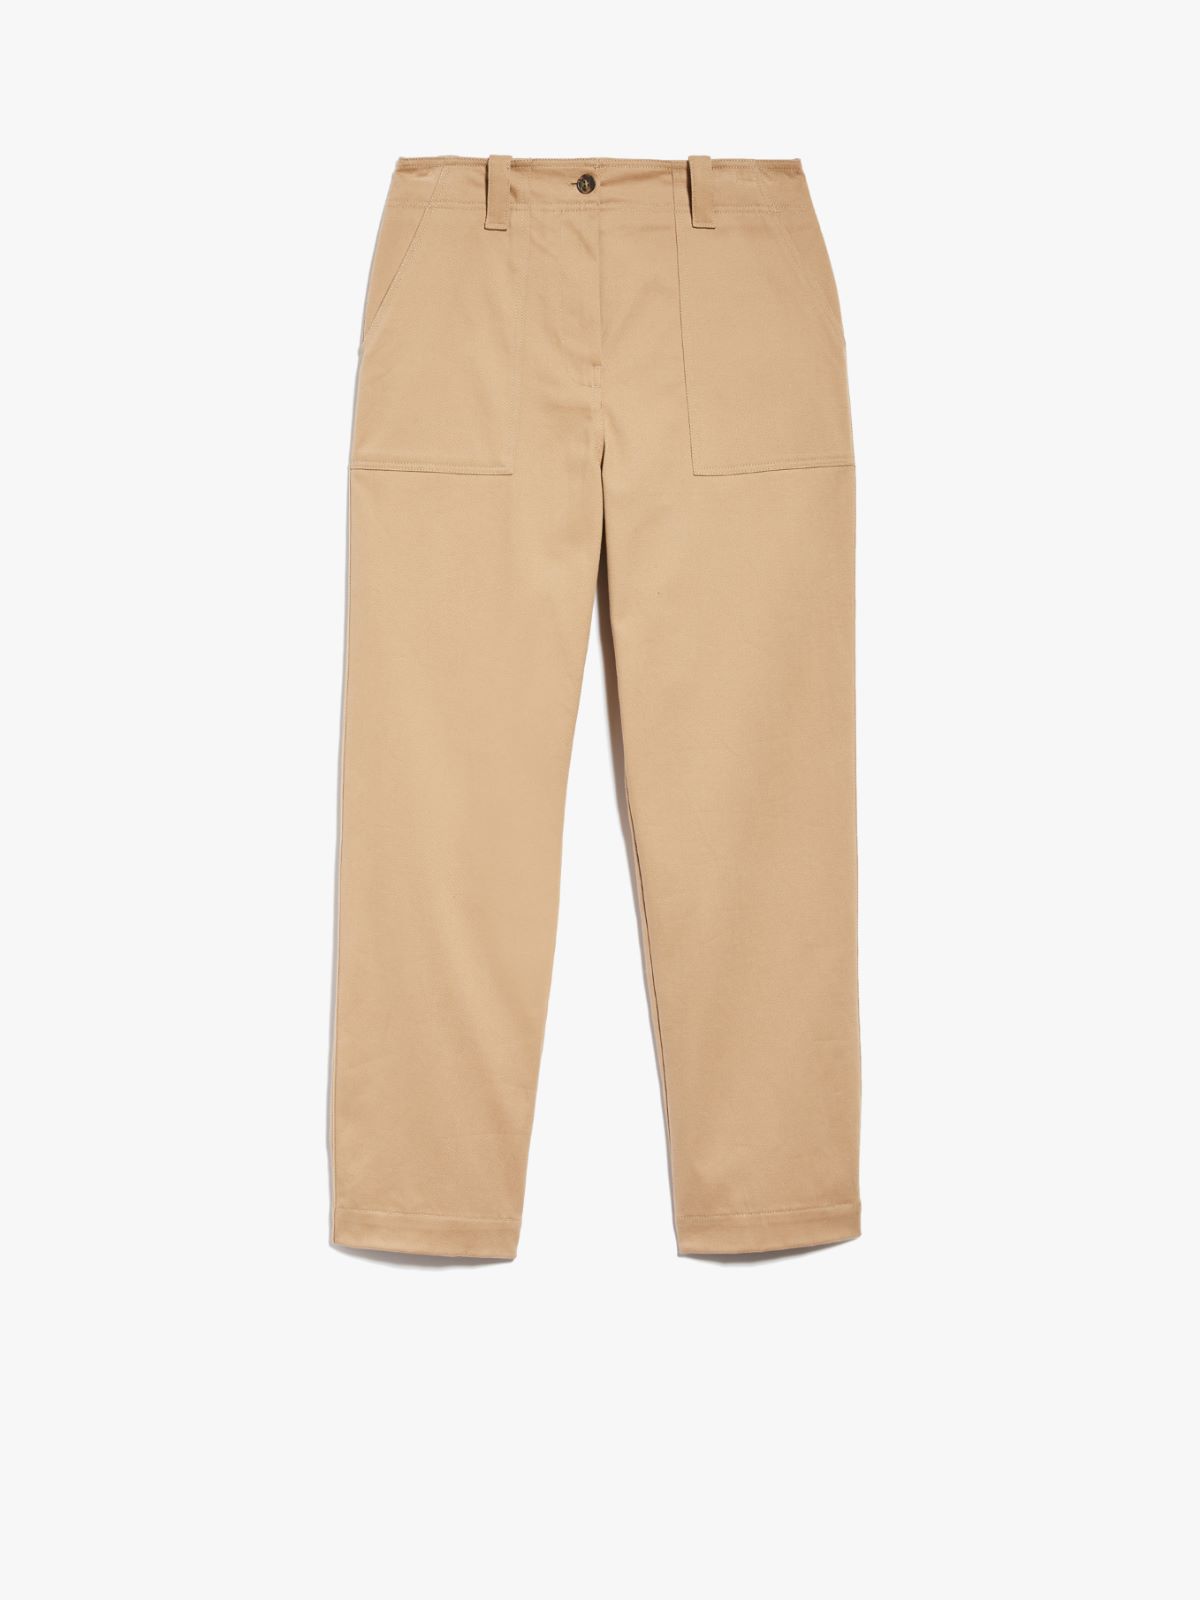 Cotton drill trousers - CAMEL - Weekend Max Mara - 5